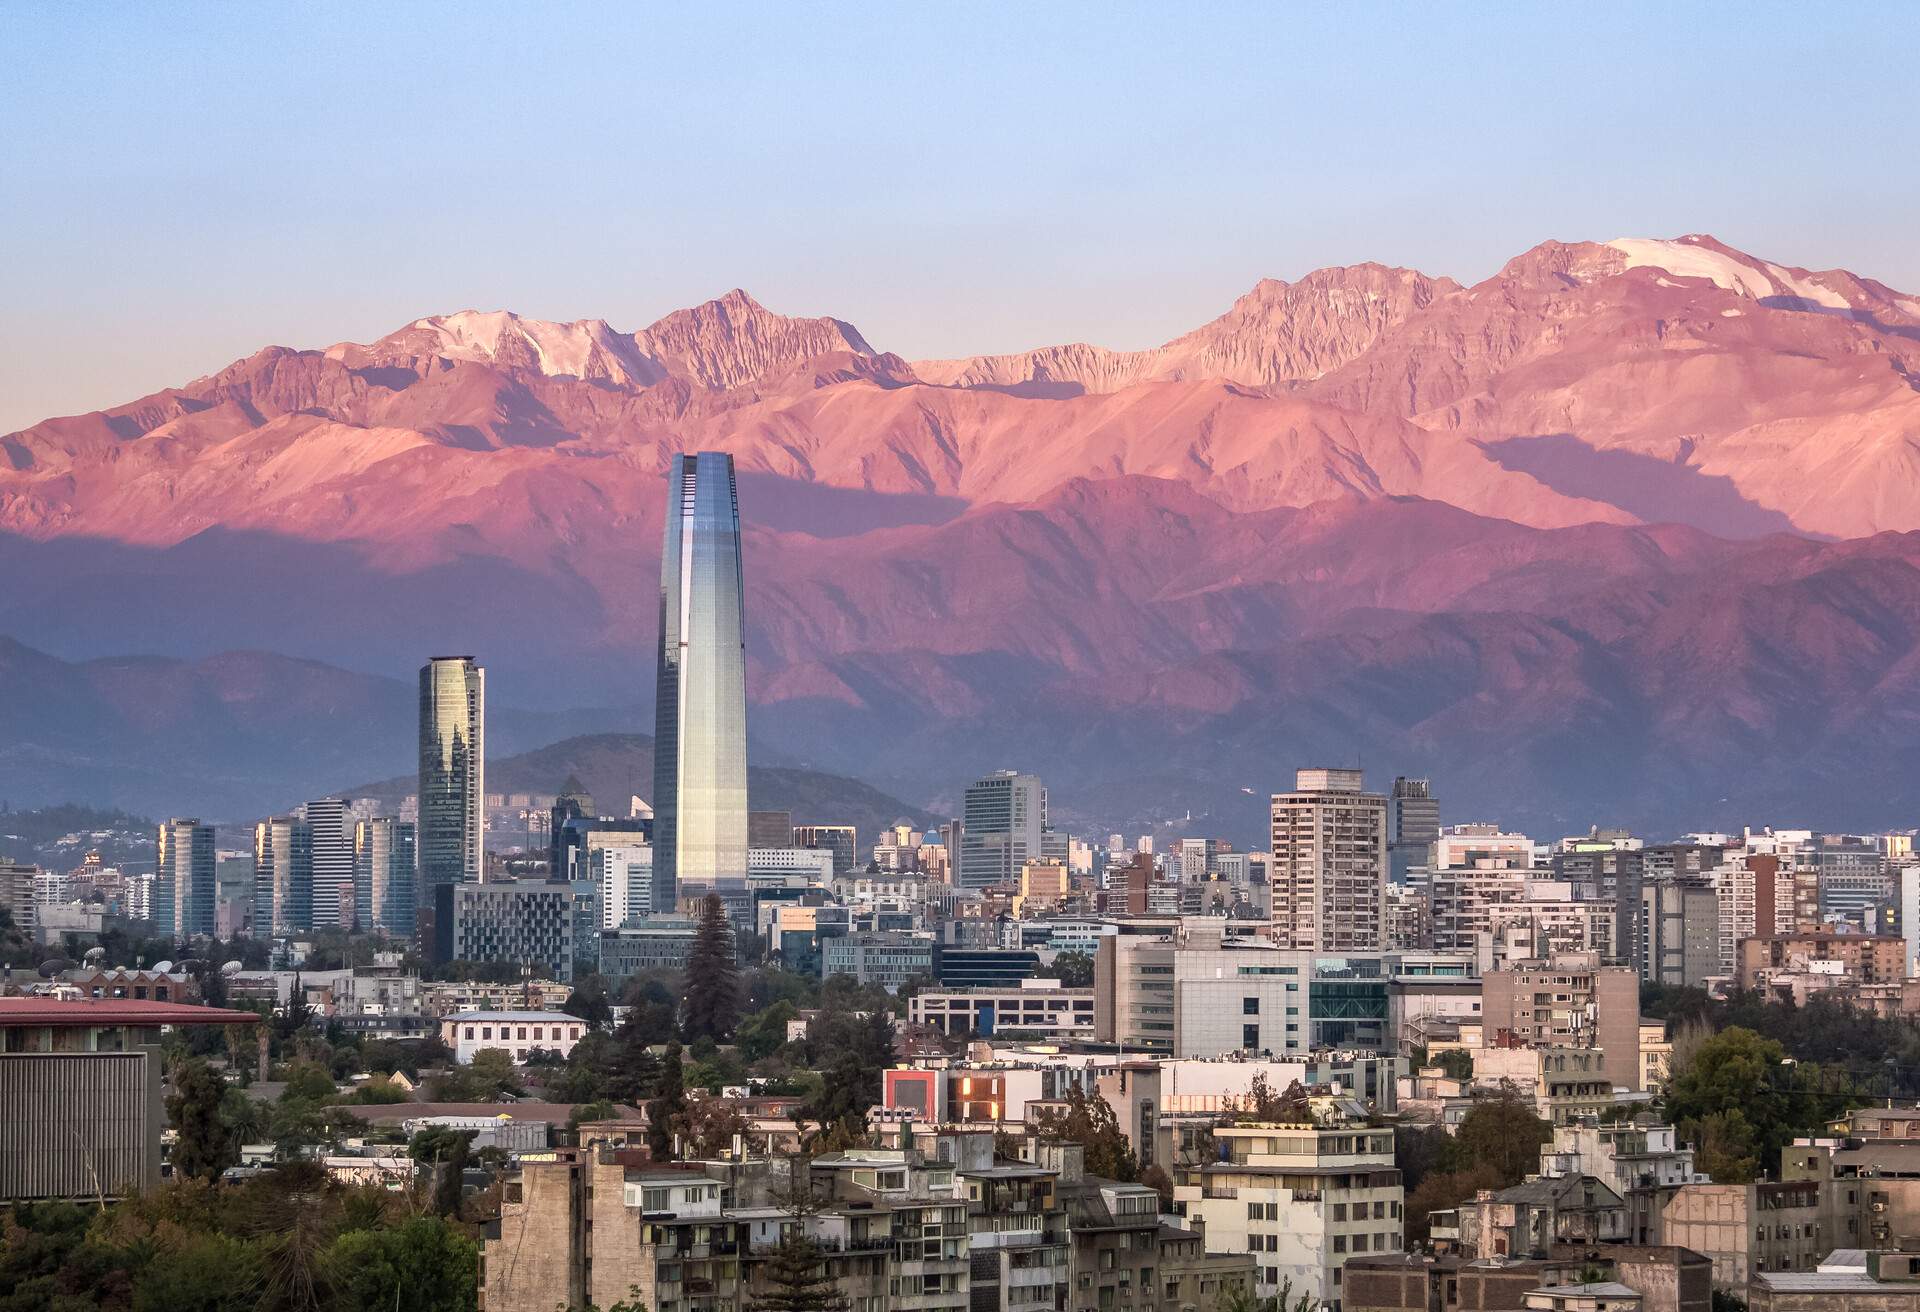 Aaerial view of Santiago skyline at sunset with Costanera skyscraper and Andes Mountains - Santiago, Chile